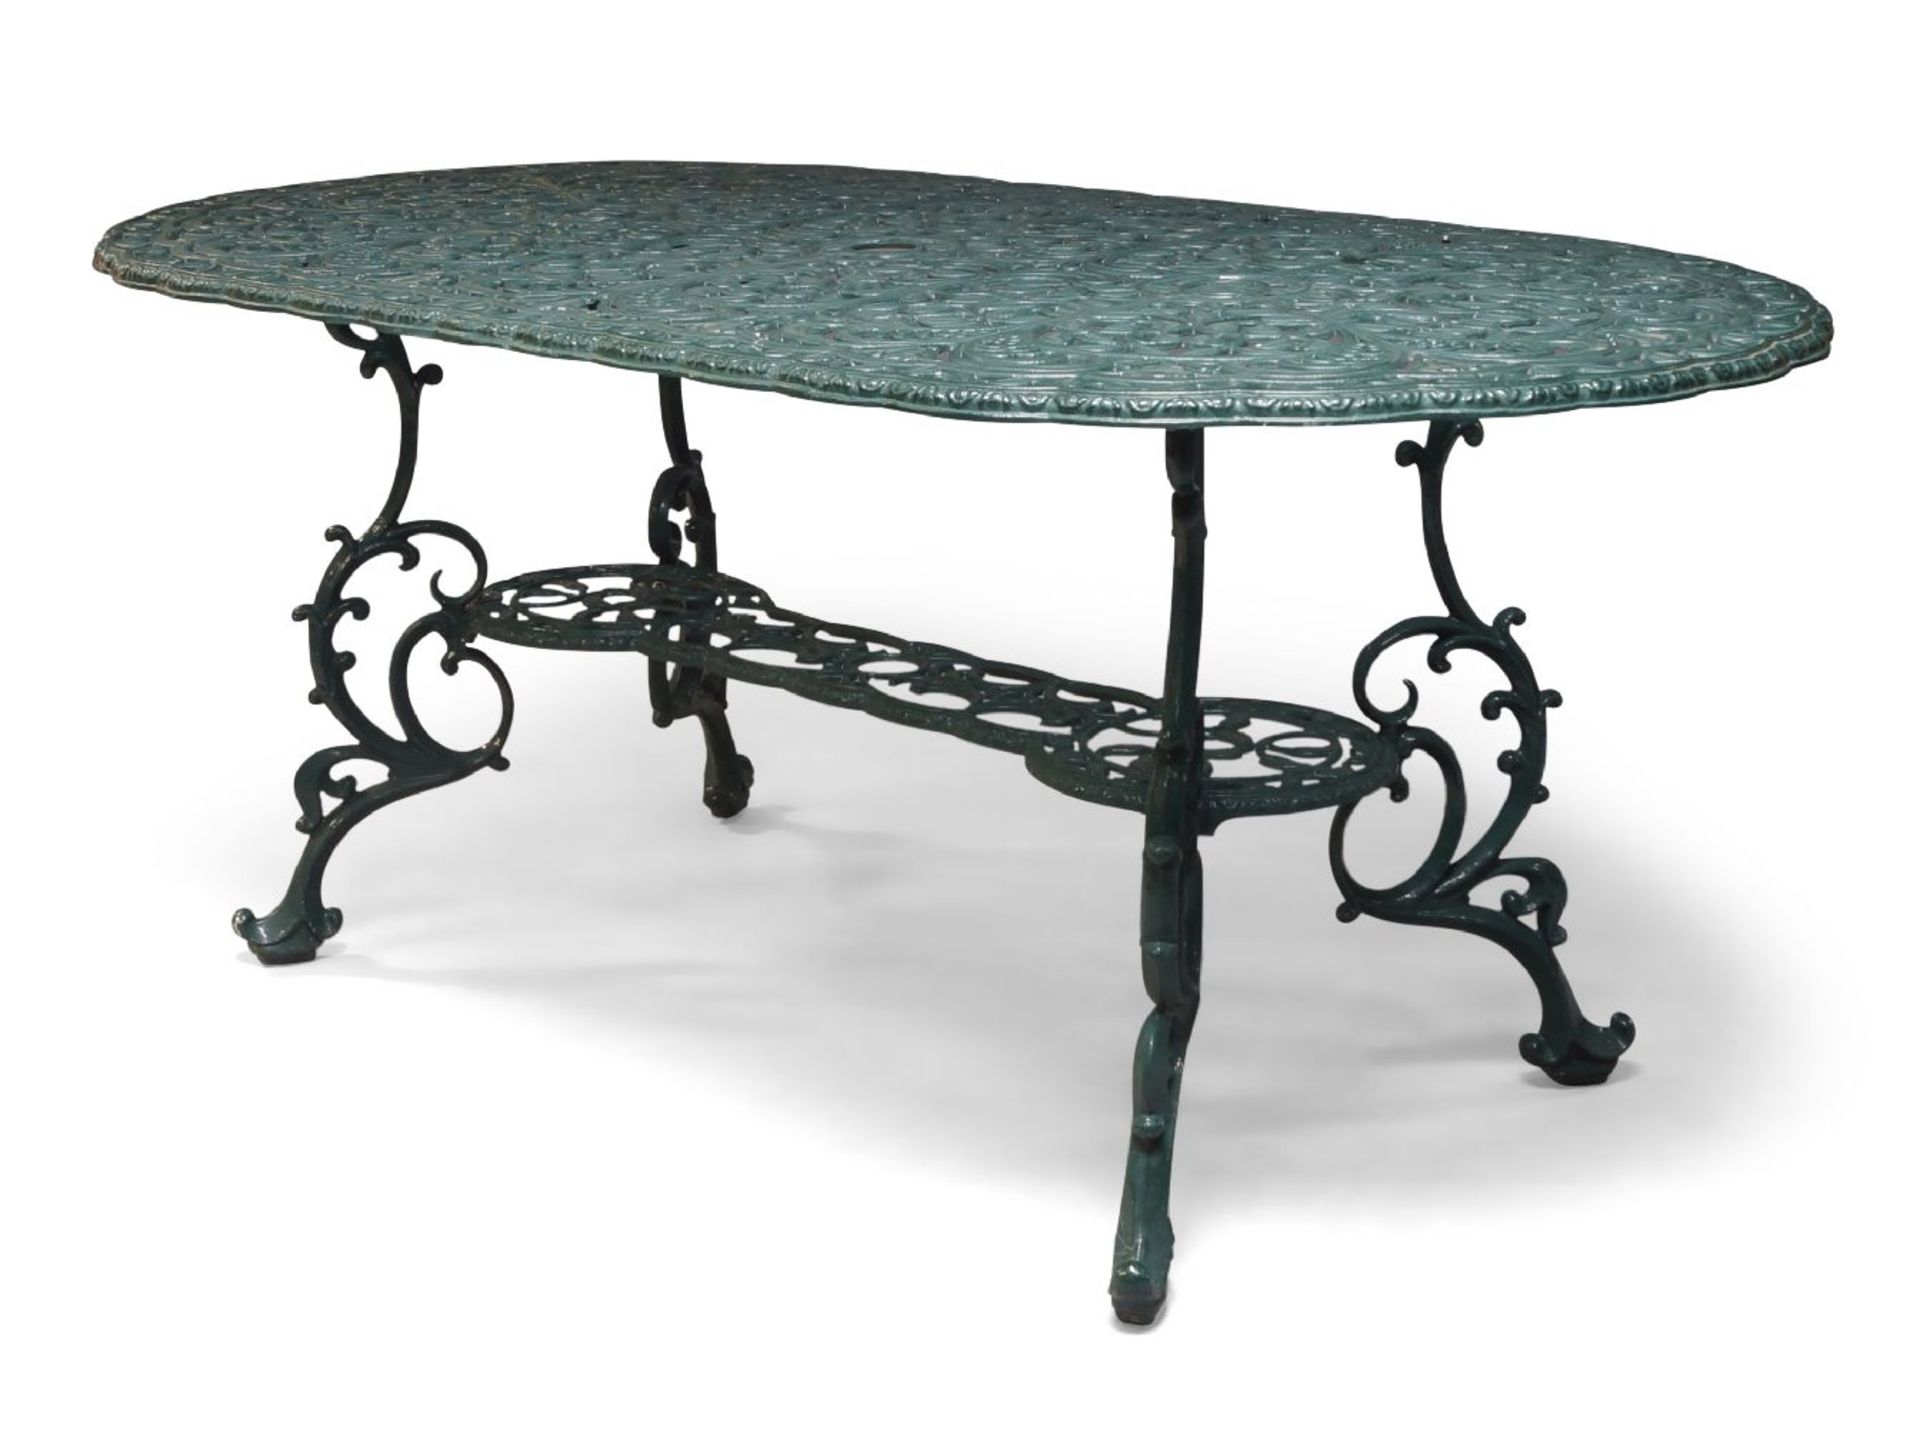 A Victorian style green painted cast aluminium garden table and six chairs, the table top with a